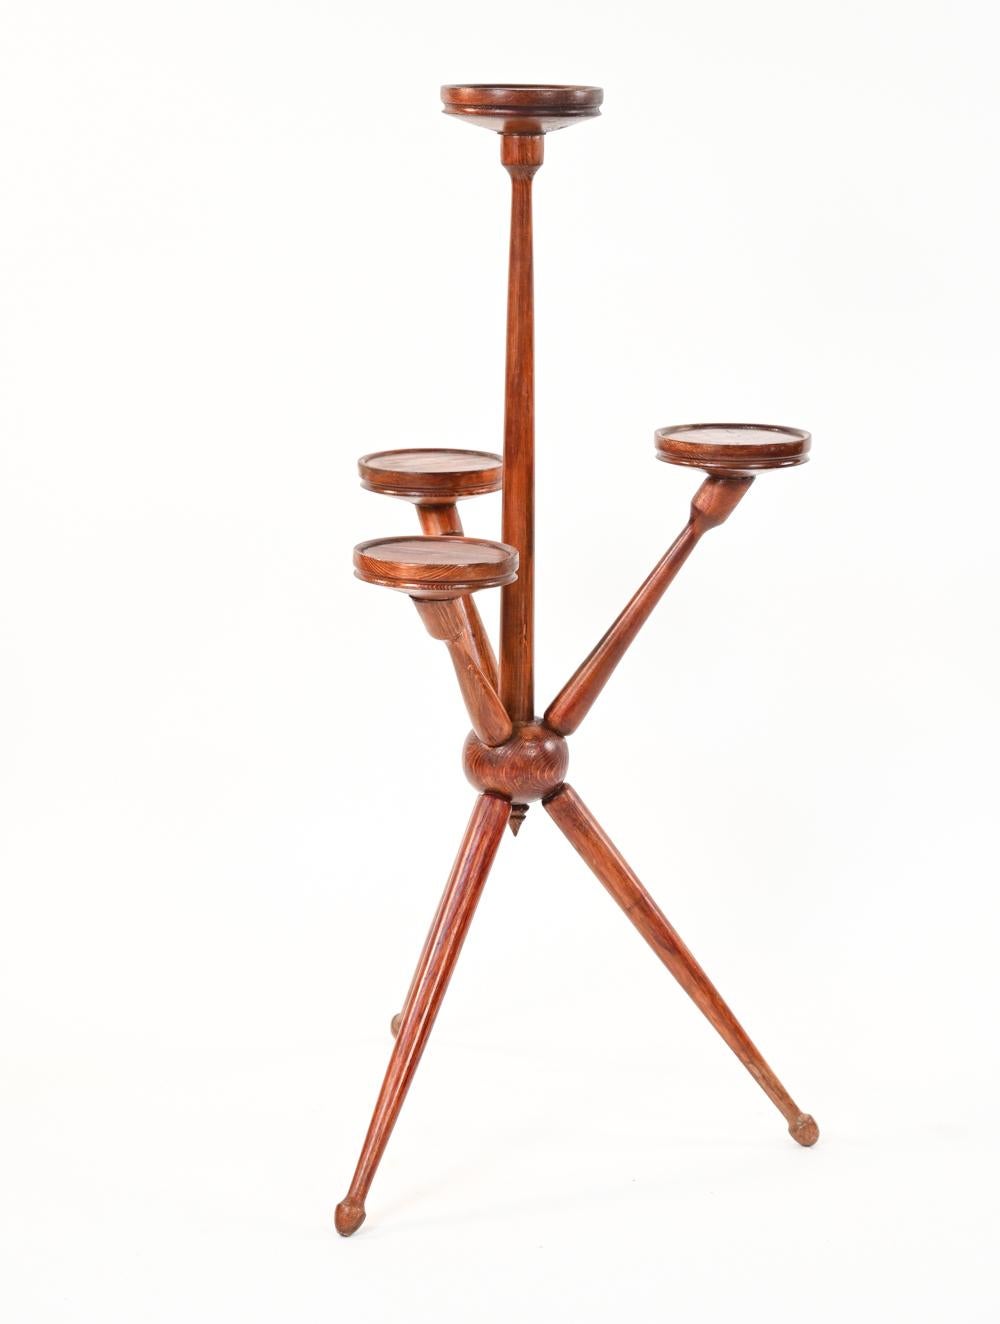 An unusual Danish Mid-Century Modern multi-height four-tiered plant stand on Sputnik-reminiscent tripod base, in stained pine wood. Each tier has a 6